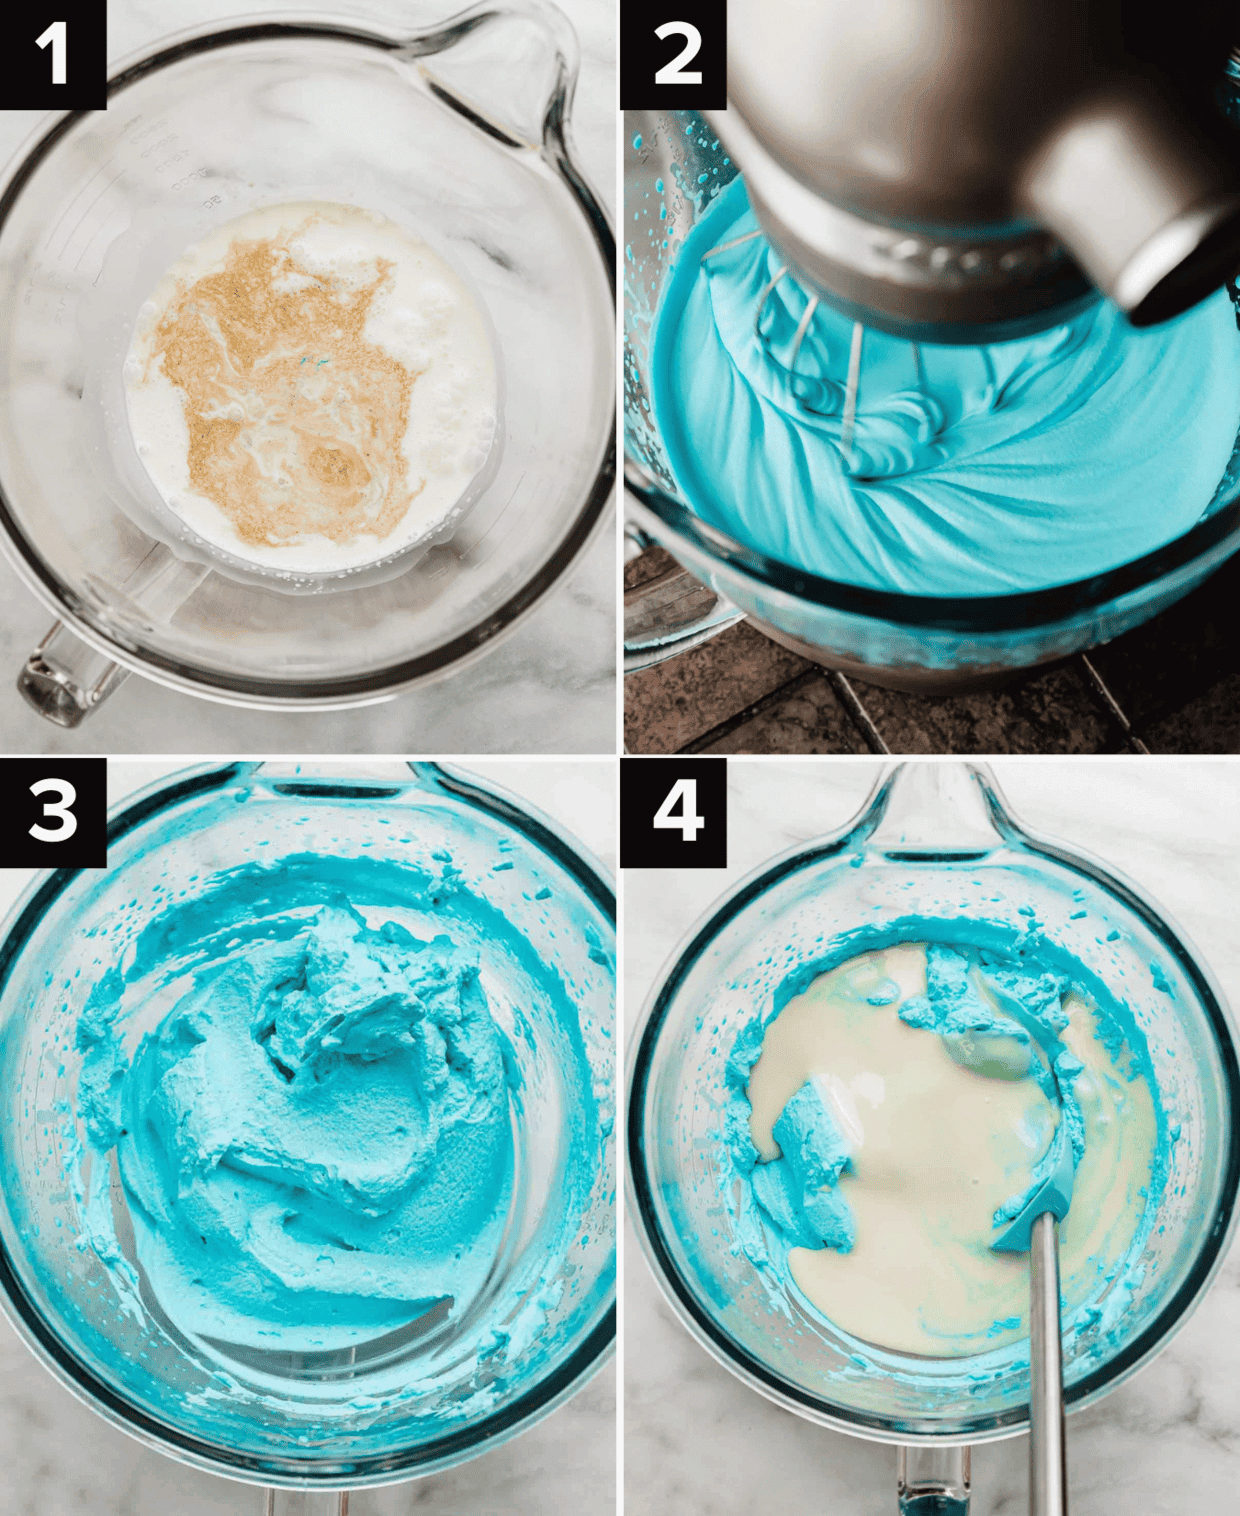 Four images showing how to make Cookie Monster Ice Cream, top left image is heavy cream in glass bowl, right image is blue heavy cream in a mixing bowl being whipped, bottom left is blue whipped cream in bowl, bottom right is sweetened condensed milk in a bowl with blue heavy cream.